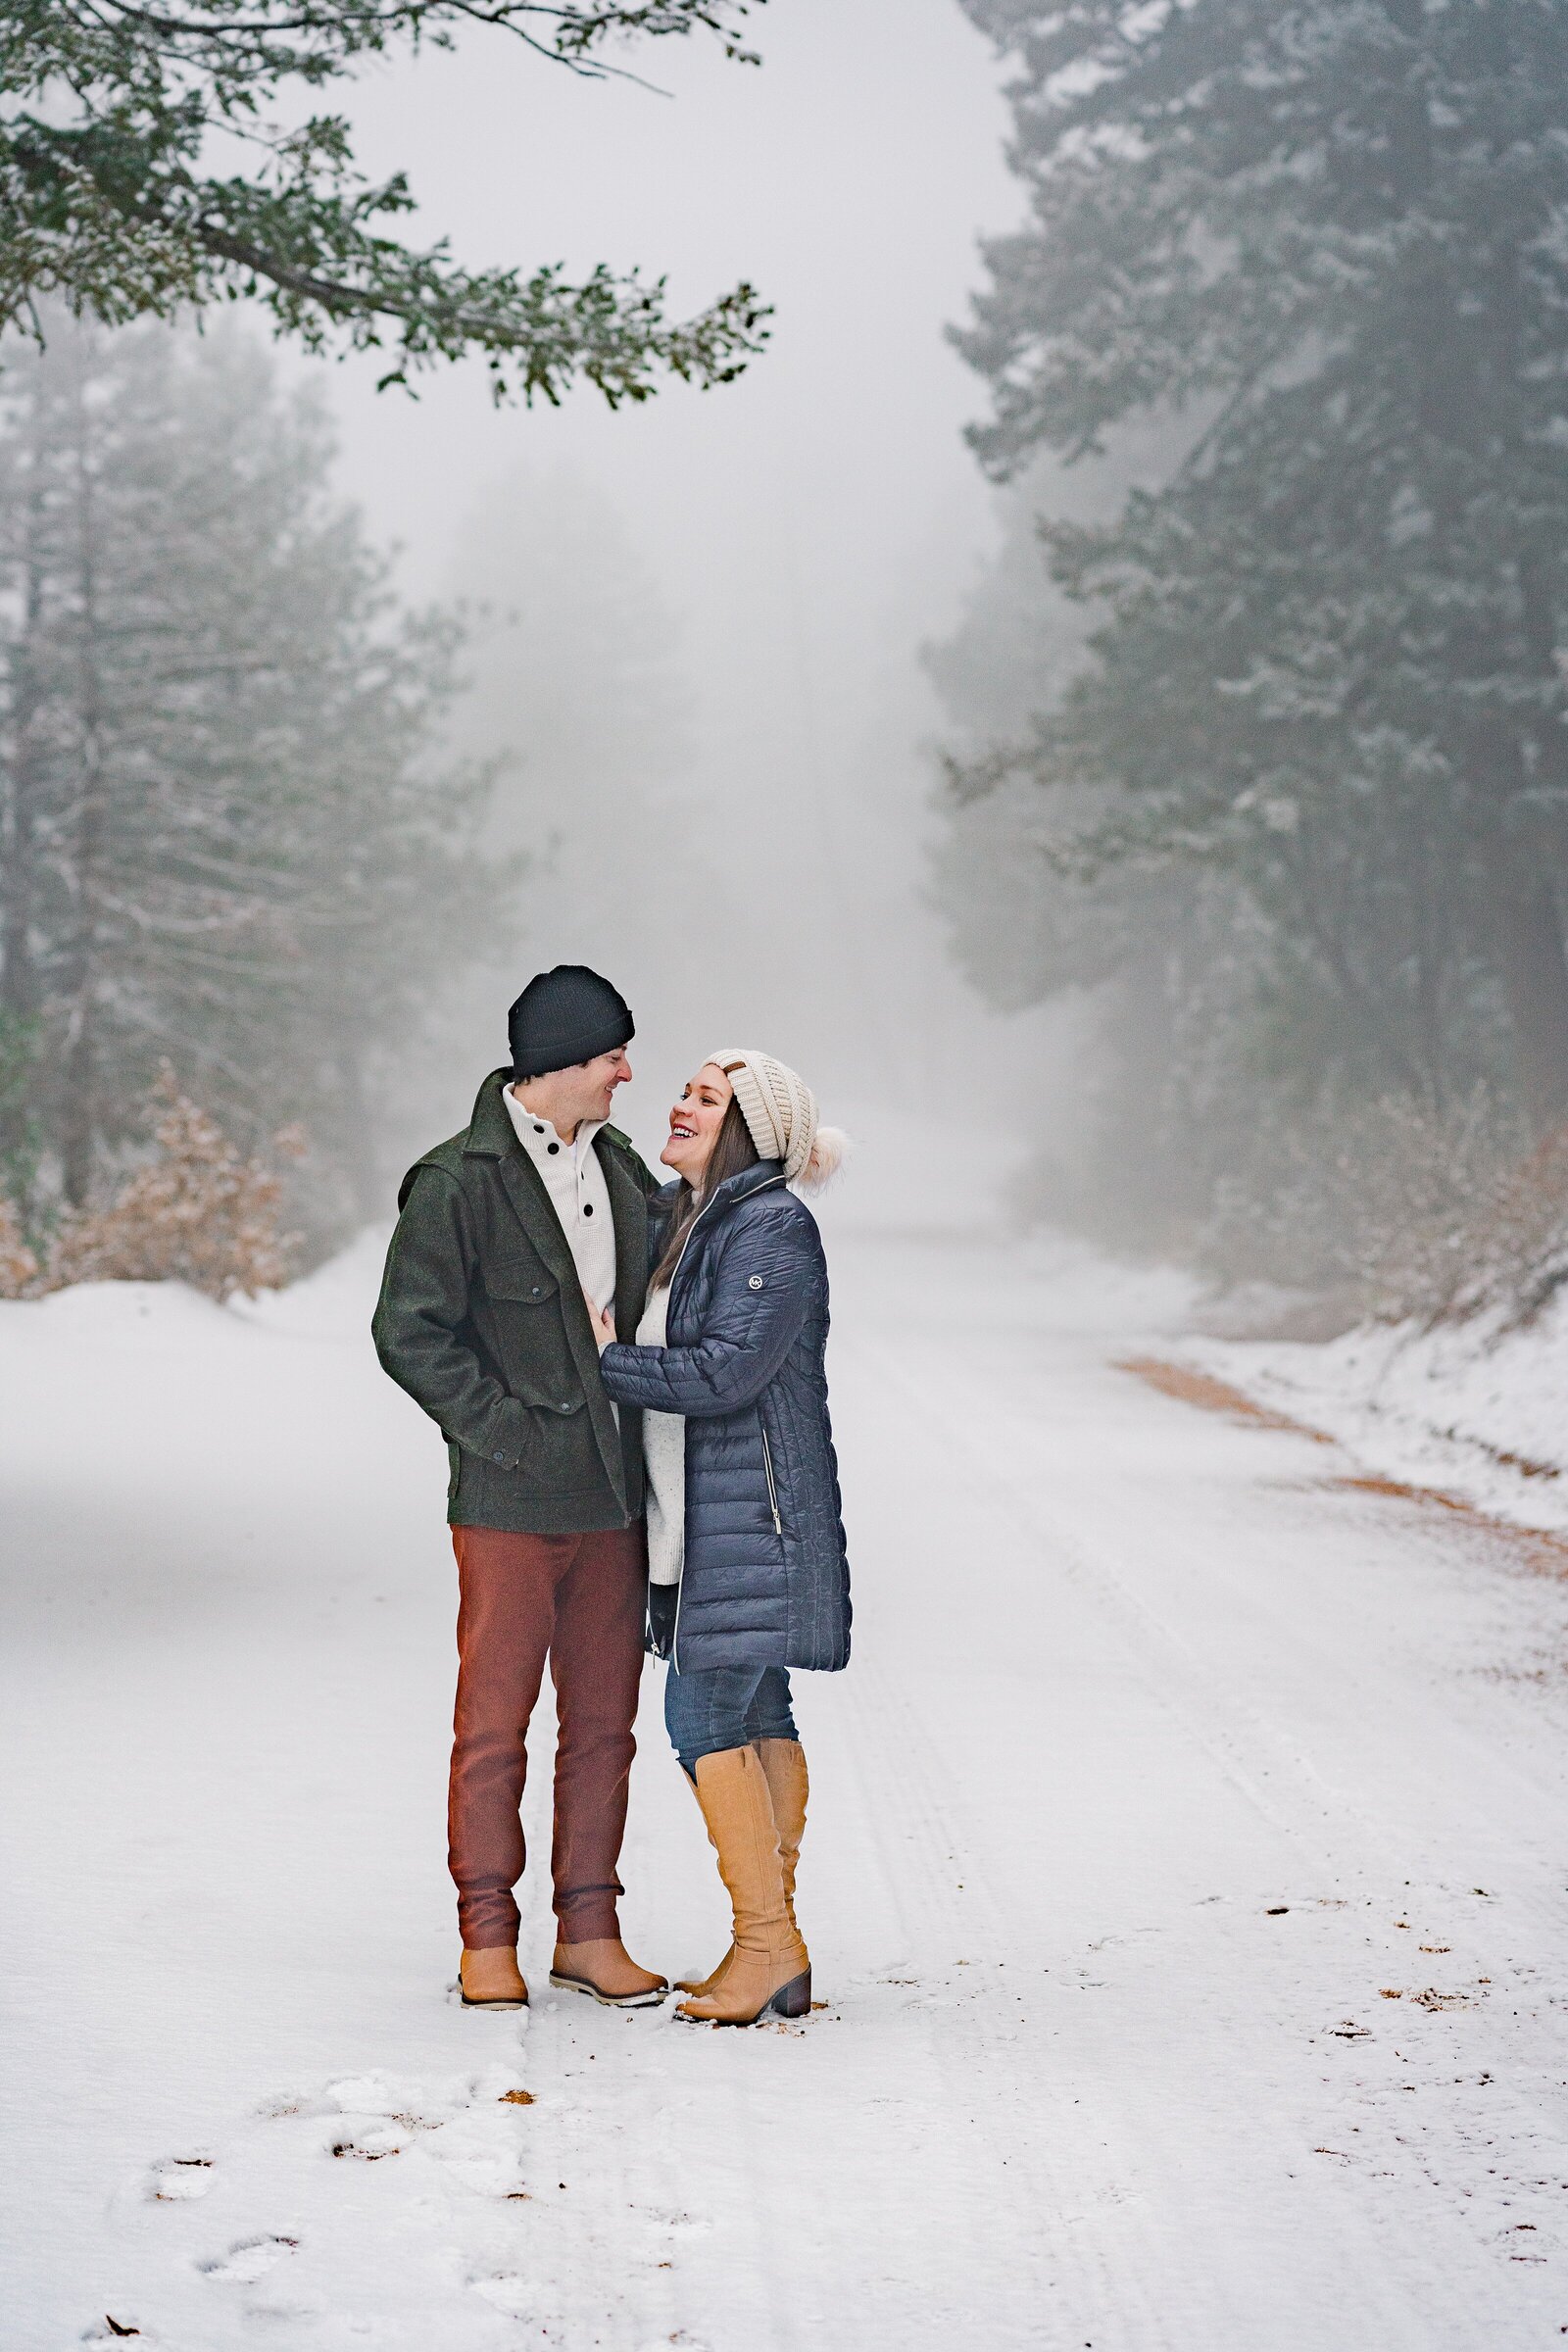 Sam Immer Photography tells your love story with authentic and meaningful photography, capturing candid moments that reflect the beauty and emotion of your relationship.